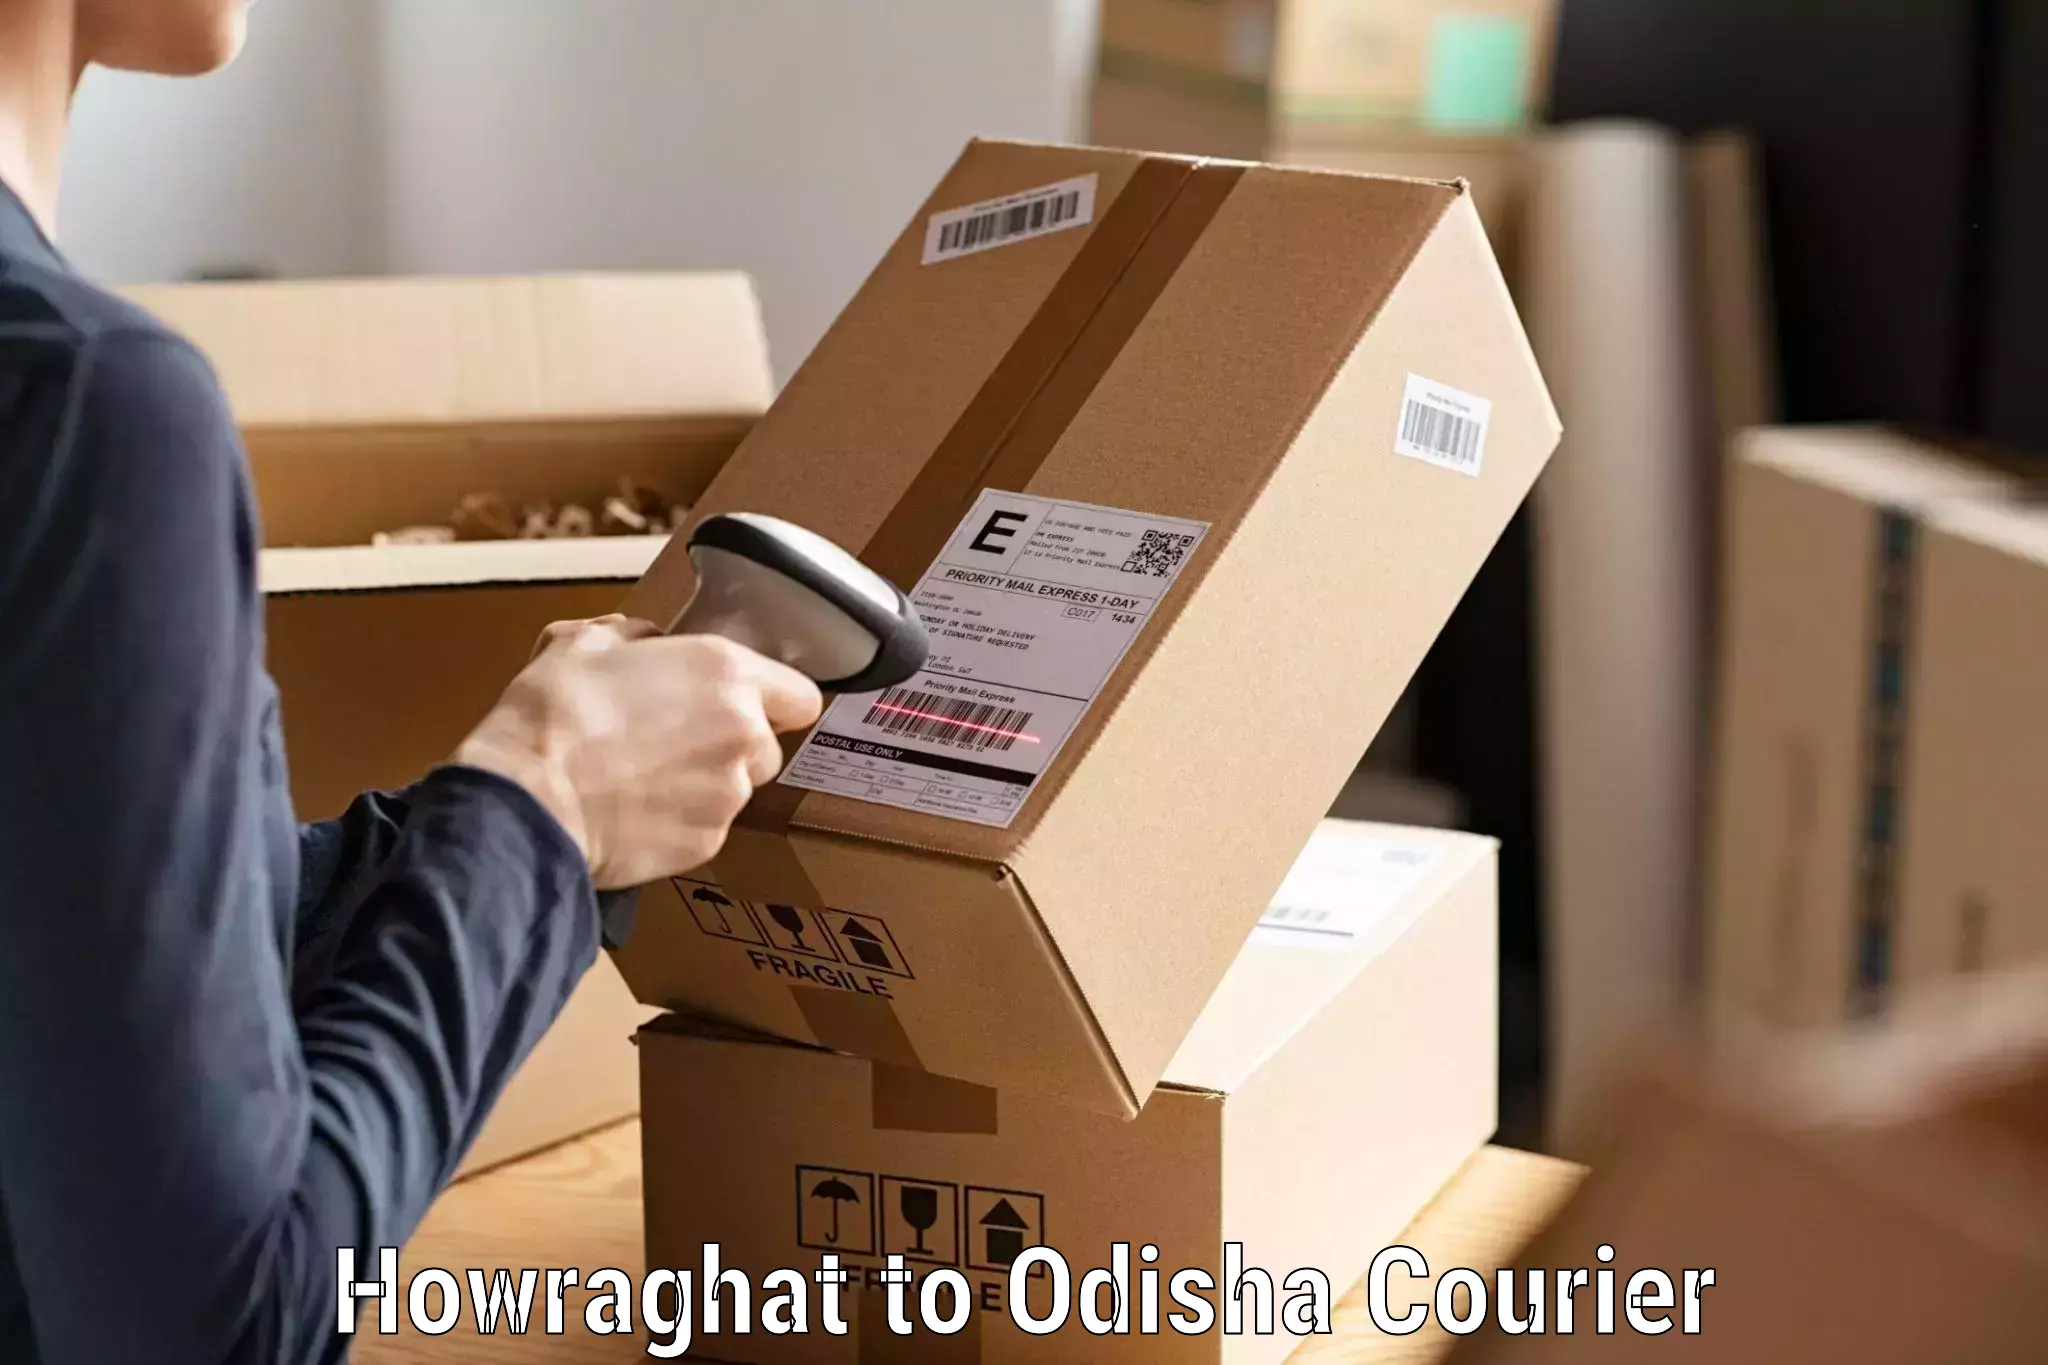 Online package tracking Howraghat to Ukhunda